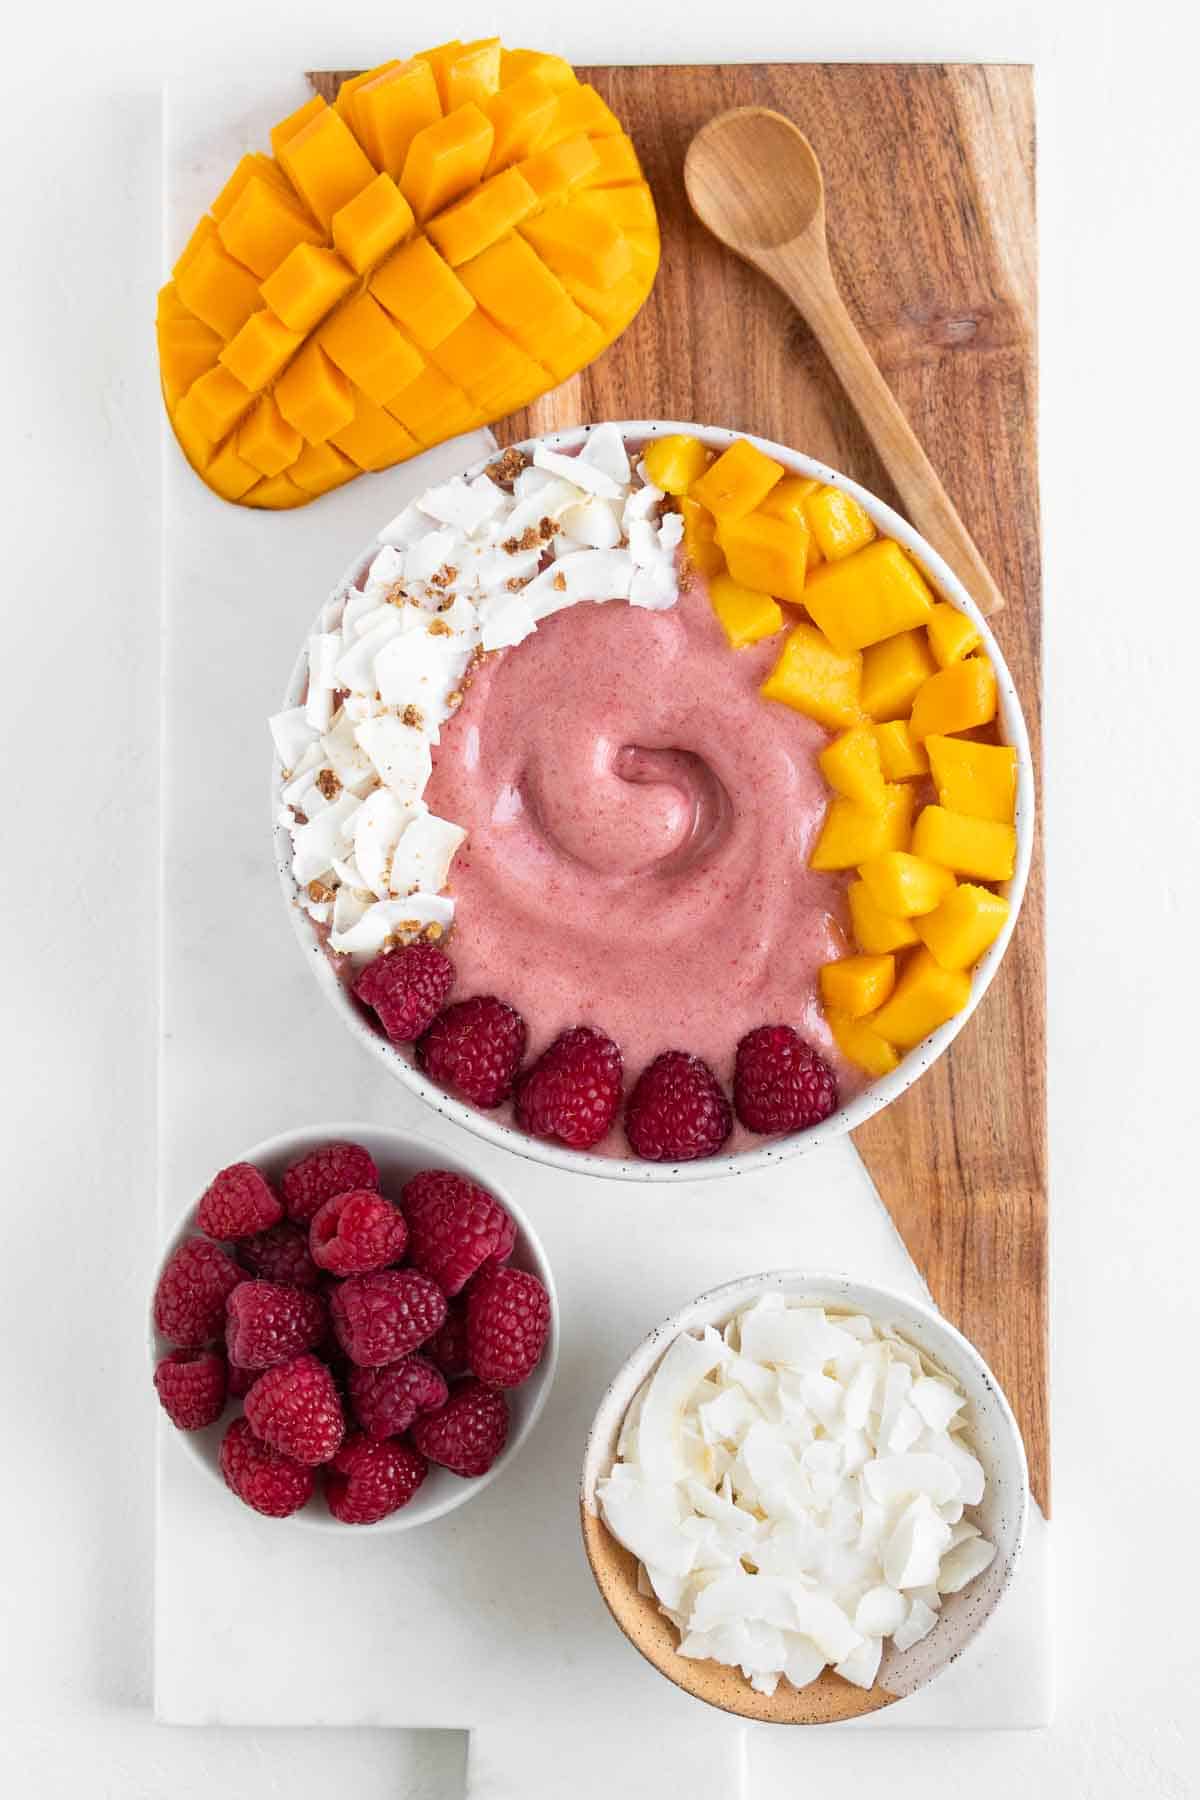 a marble and wooden cutting board topped with a raspberry mango smoothie bowl, a sliced mango, a bowl of berries, a bowl of coconut flakes, and a wooden spoon